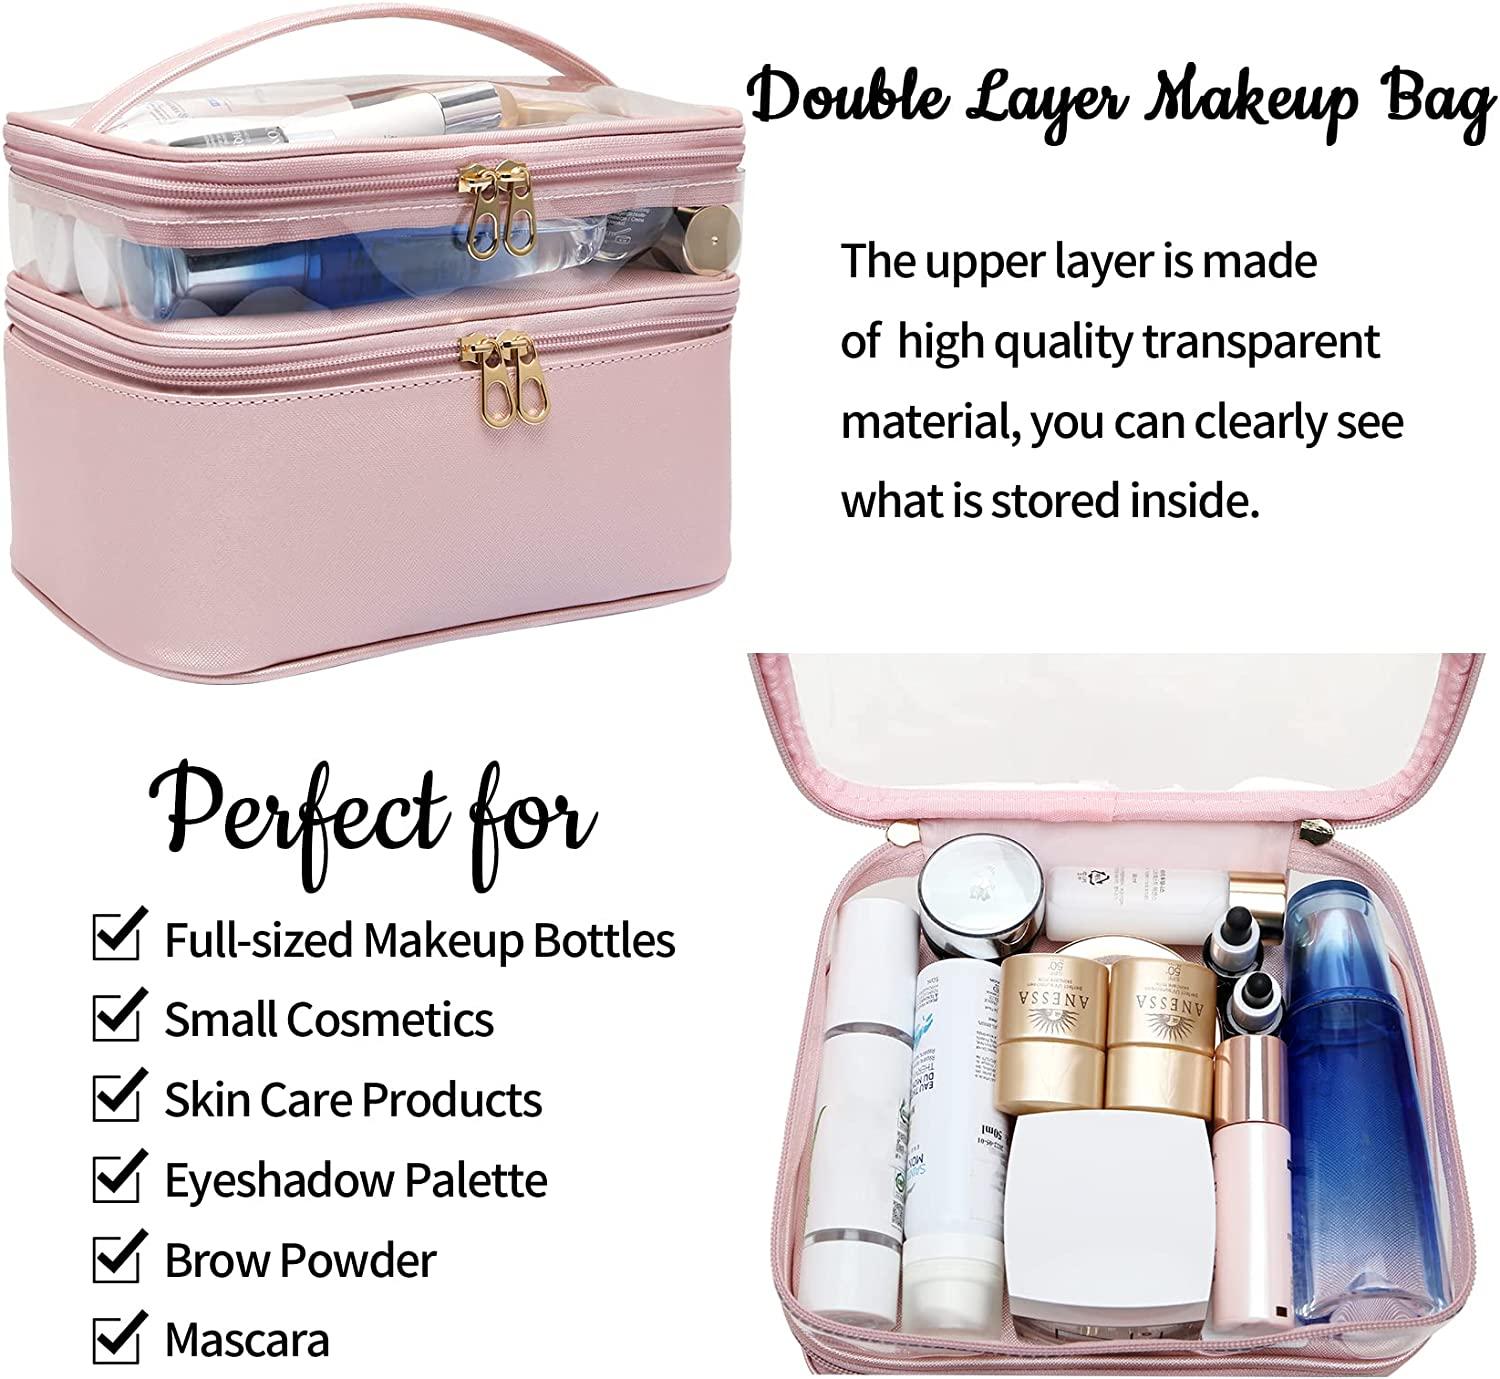 Makeup Bag,Leather Double Layer Large Makeup Organizer Bag,Travel  Accessories Dorm Room Essentials Toiletry Bag for Women,Travel Essentials Cosmetic  Bag Makeup Case with Detachable Divider for Brush 1-Pink